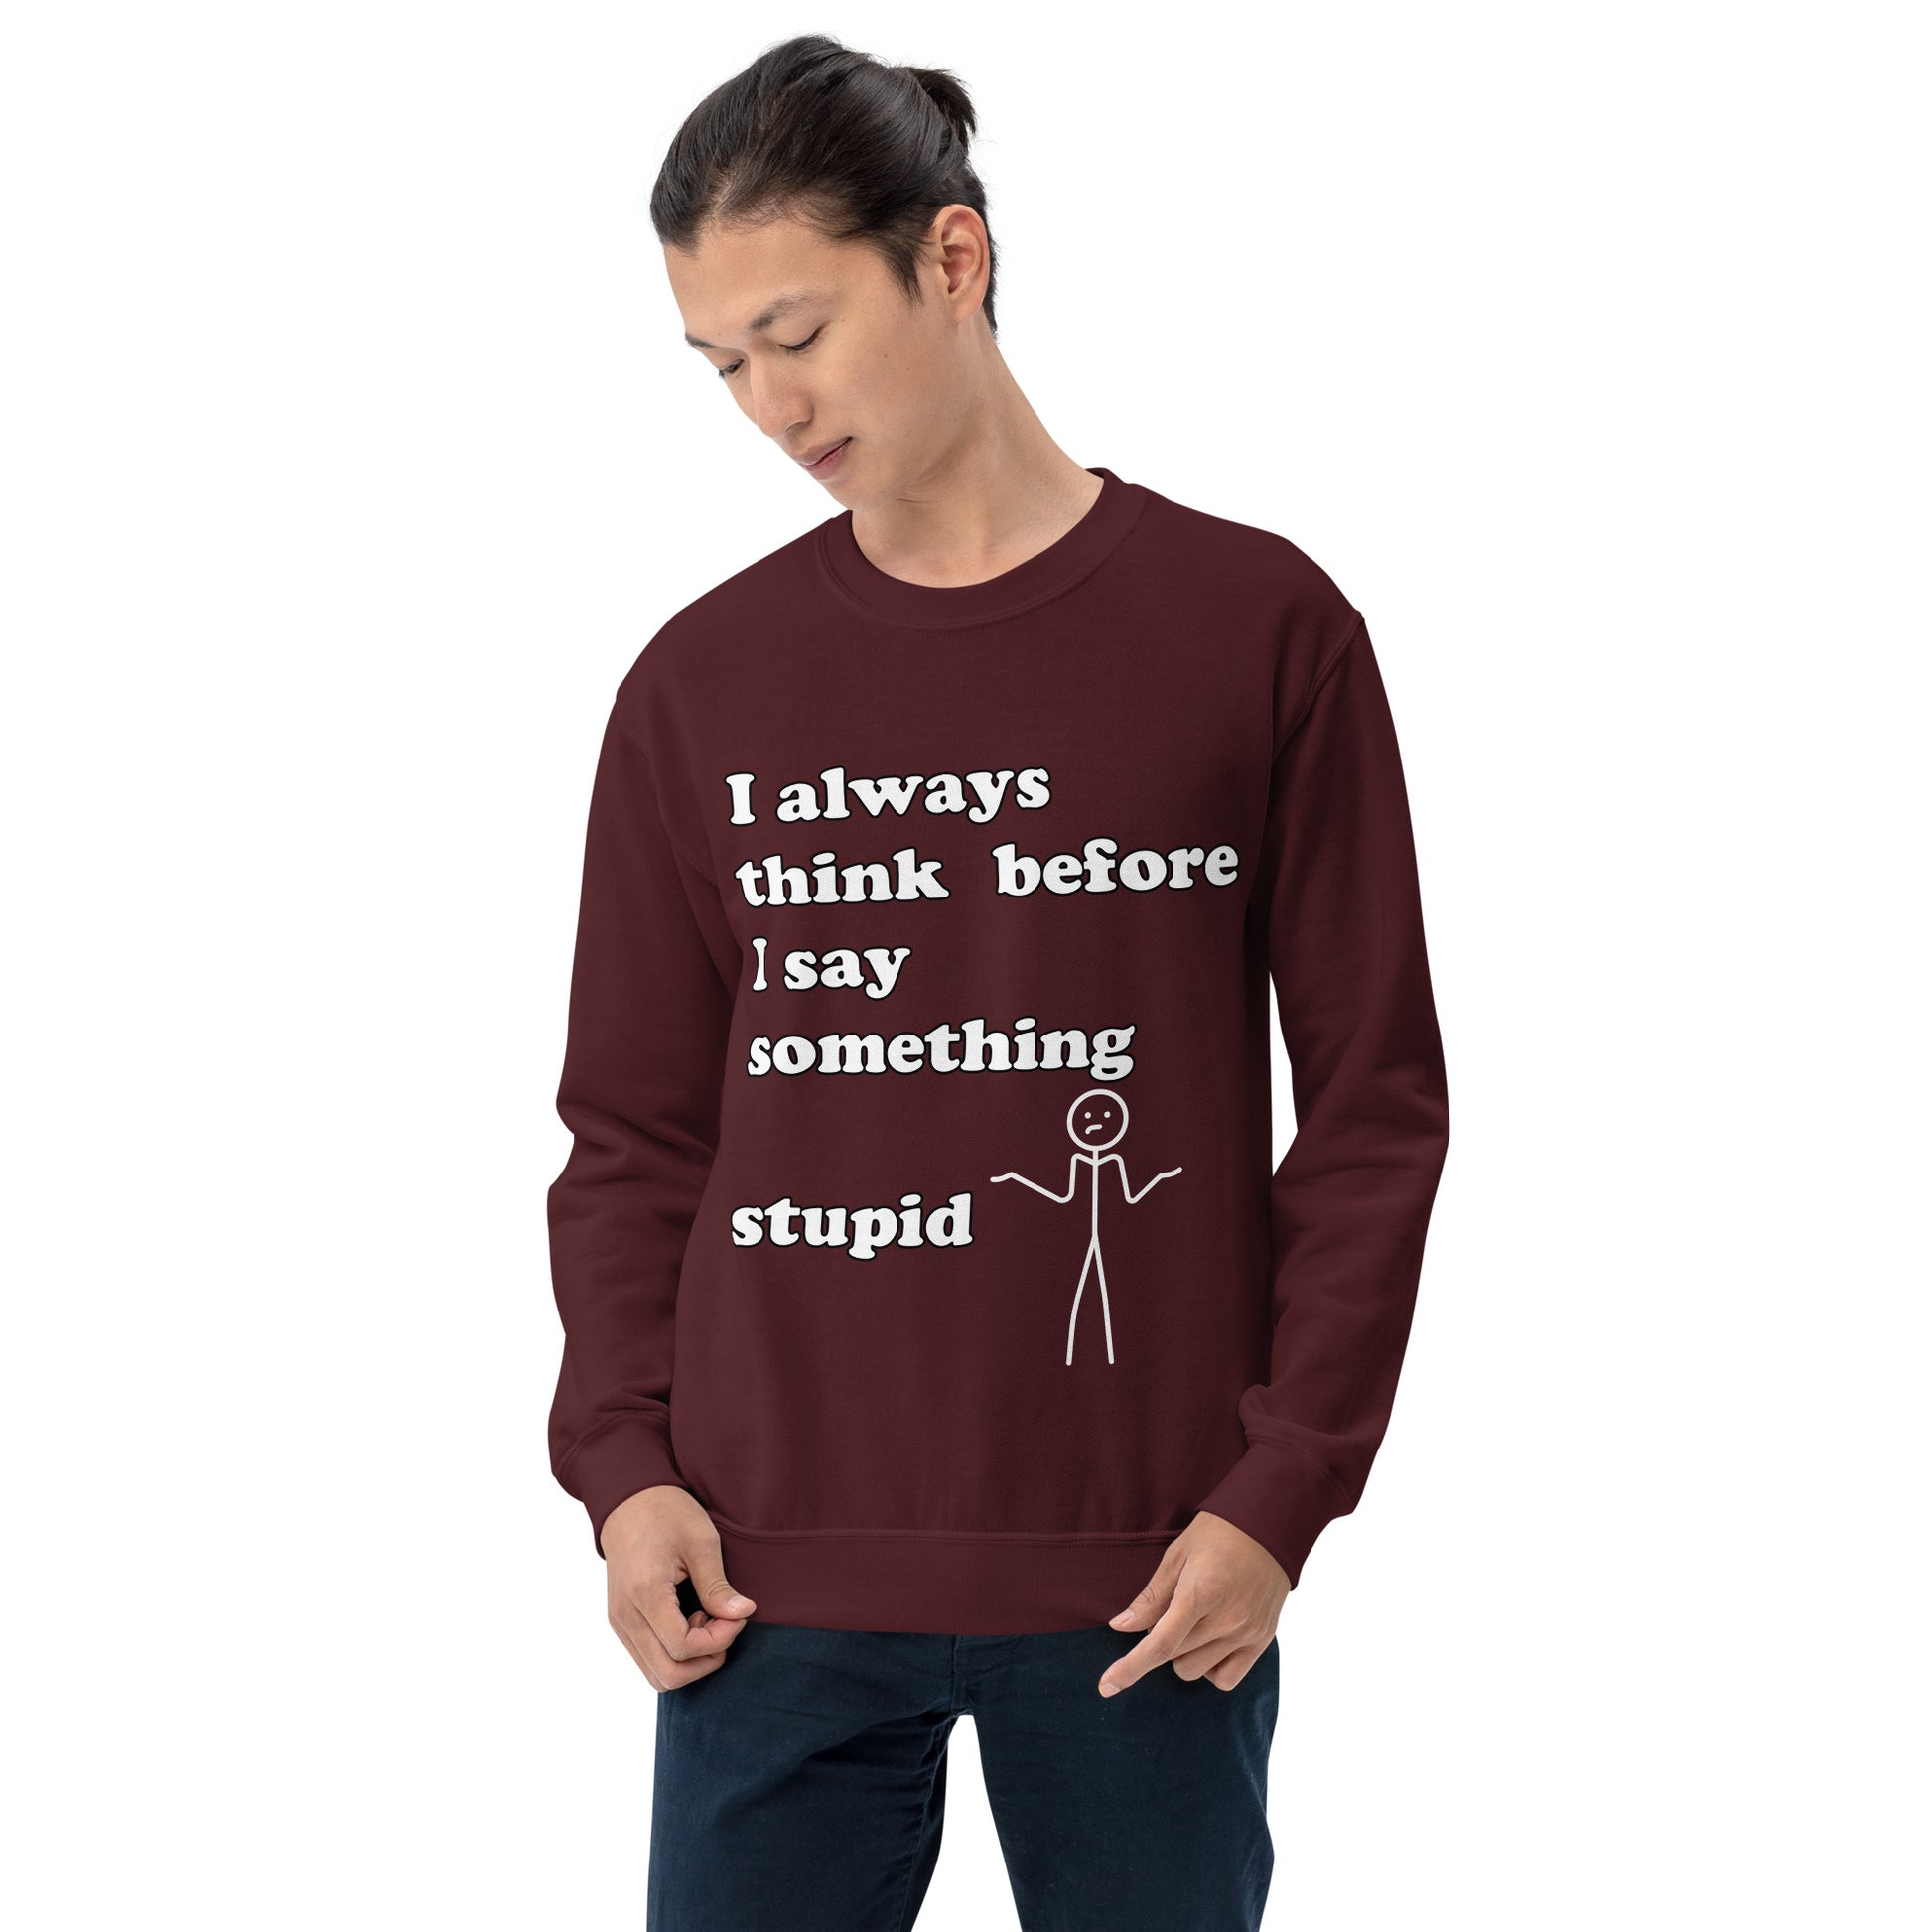 Man with maroon sweatshirt with text "I always think before I say something stupid"